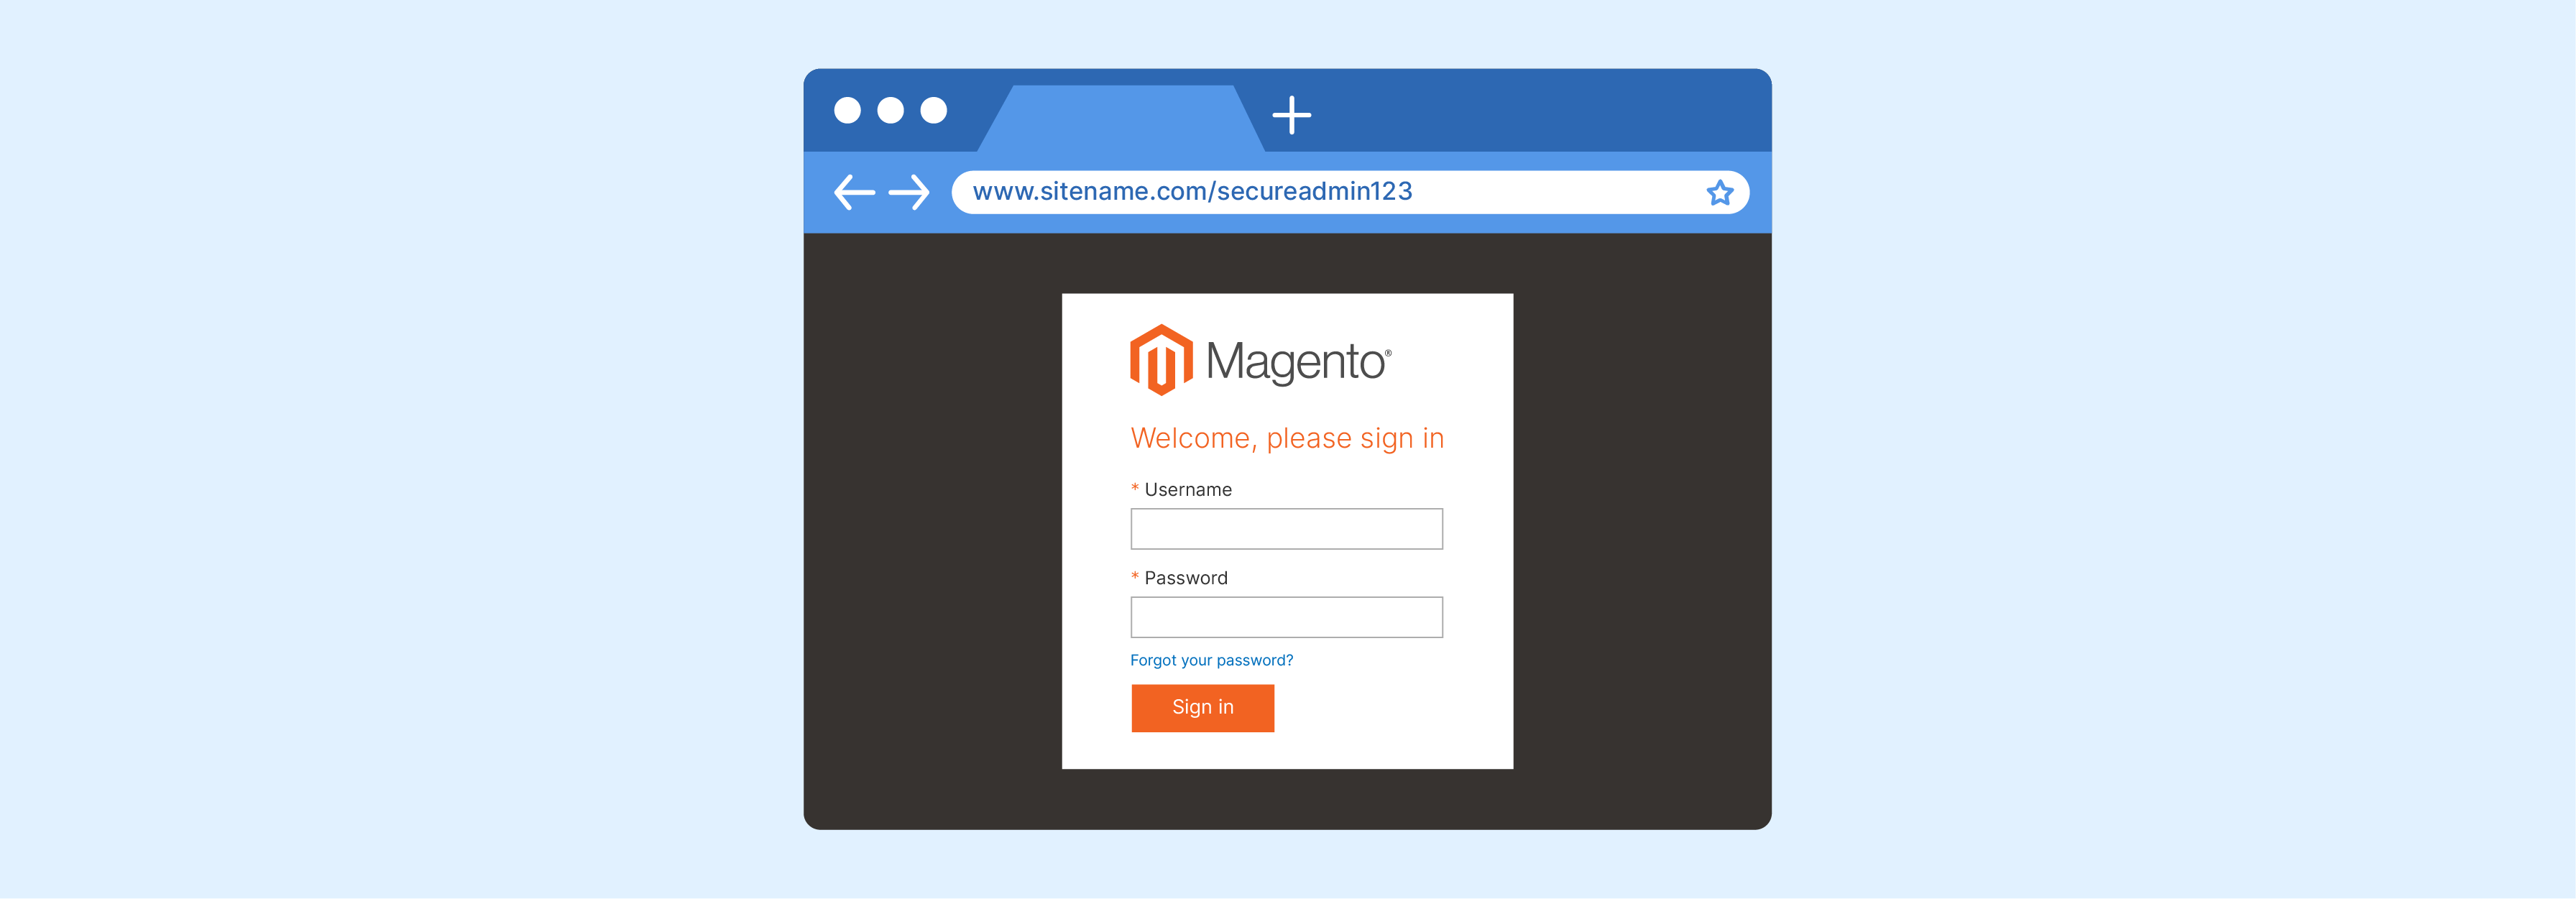 Customized secure admin settings in Magento interface